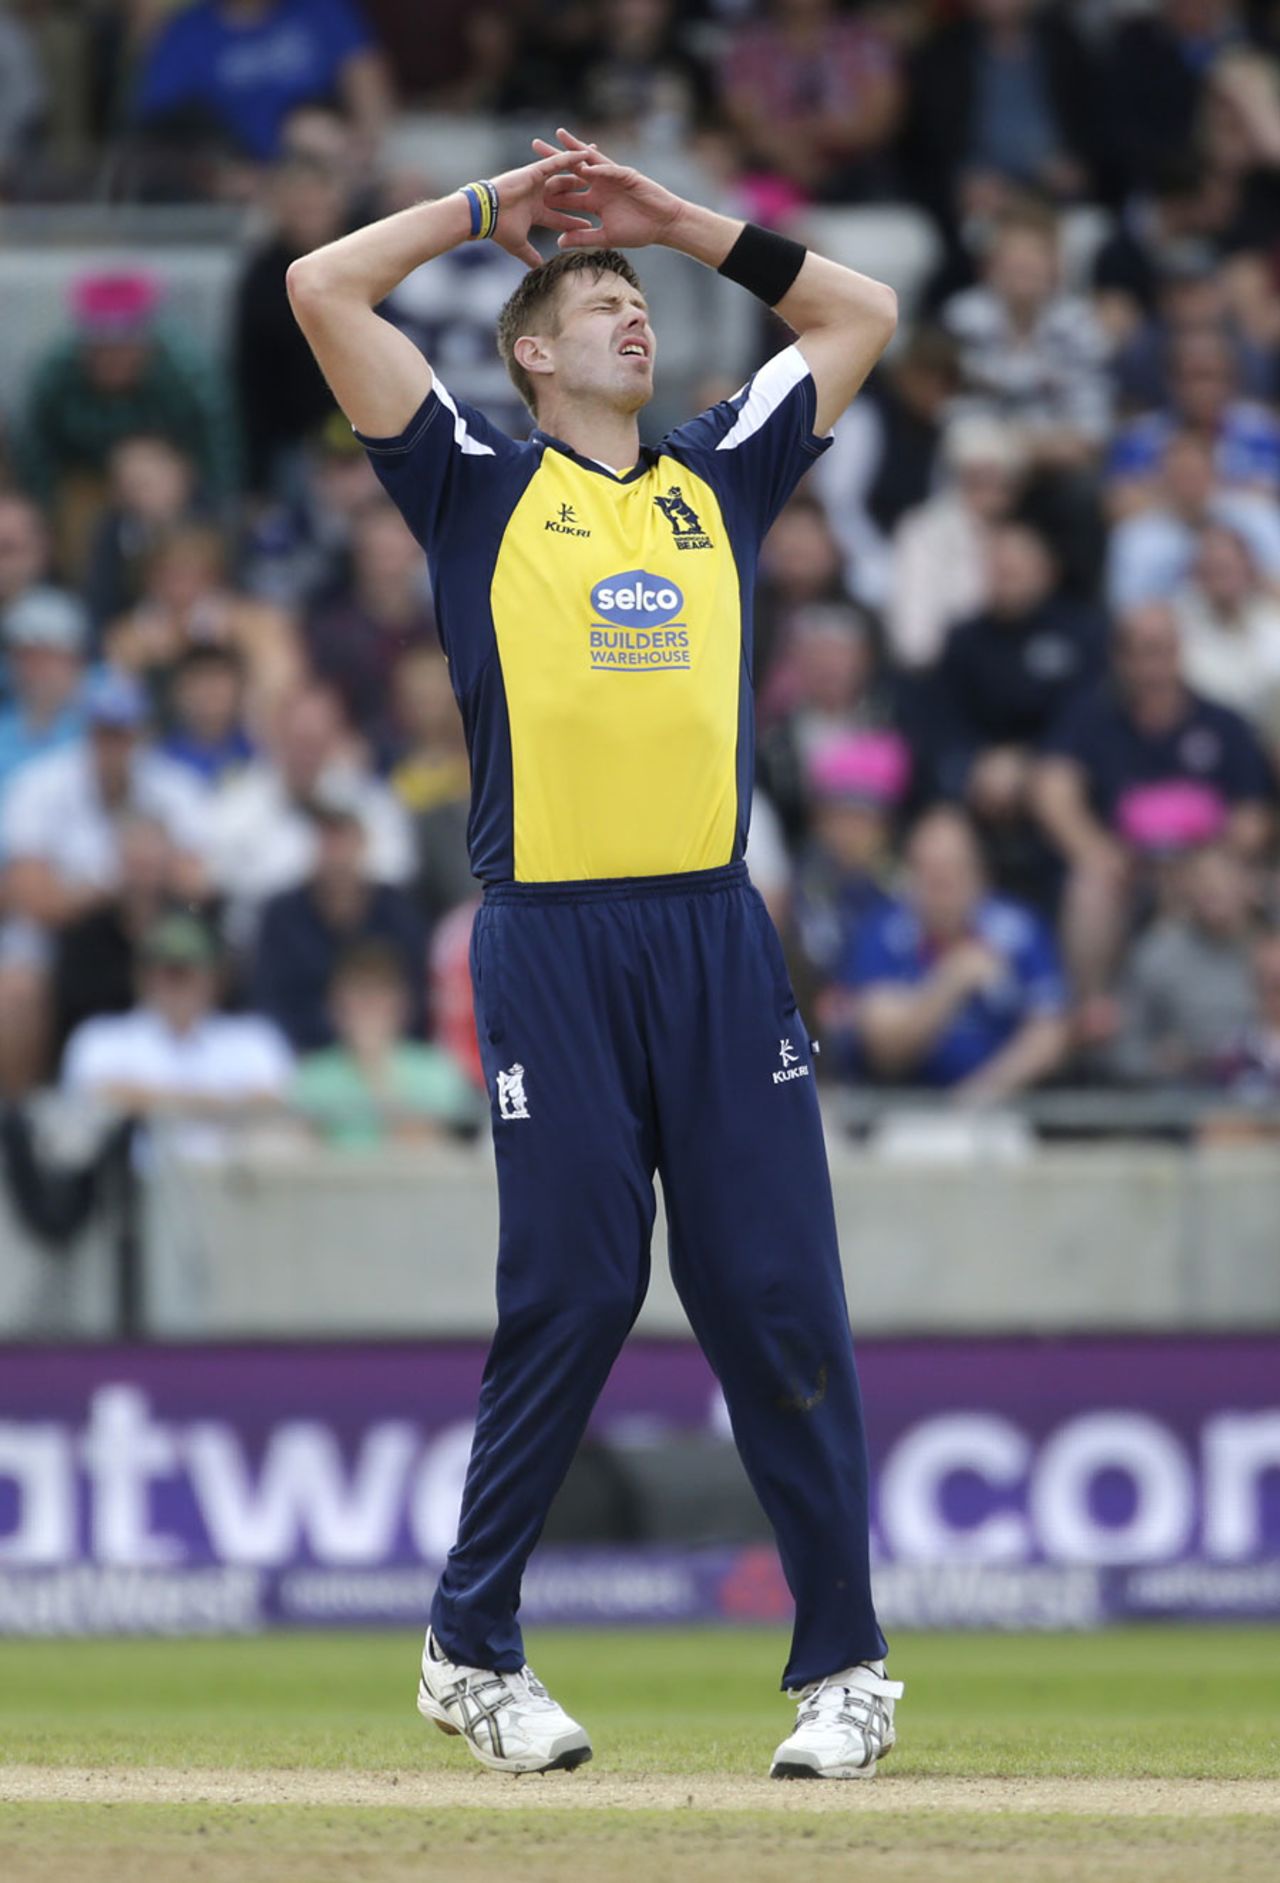 Boyd Rankin shows his despair during a disappointing performance from his side, Northamptonshire v Warwickshire, NatWest T20 Blast, semi-final, Edgbaston, August 29, 2015